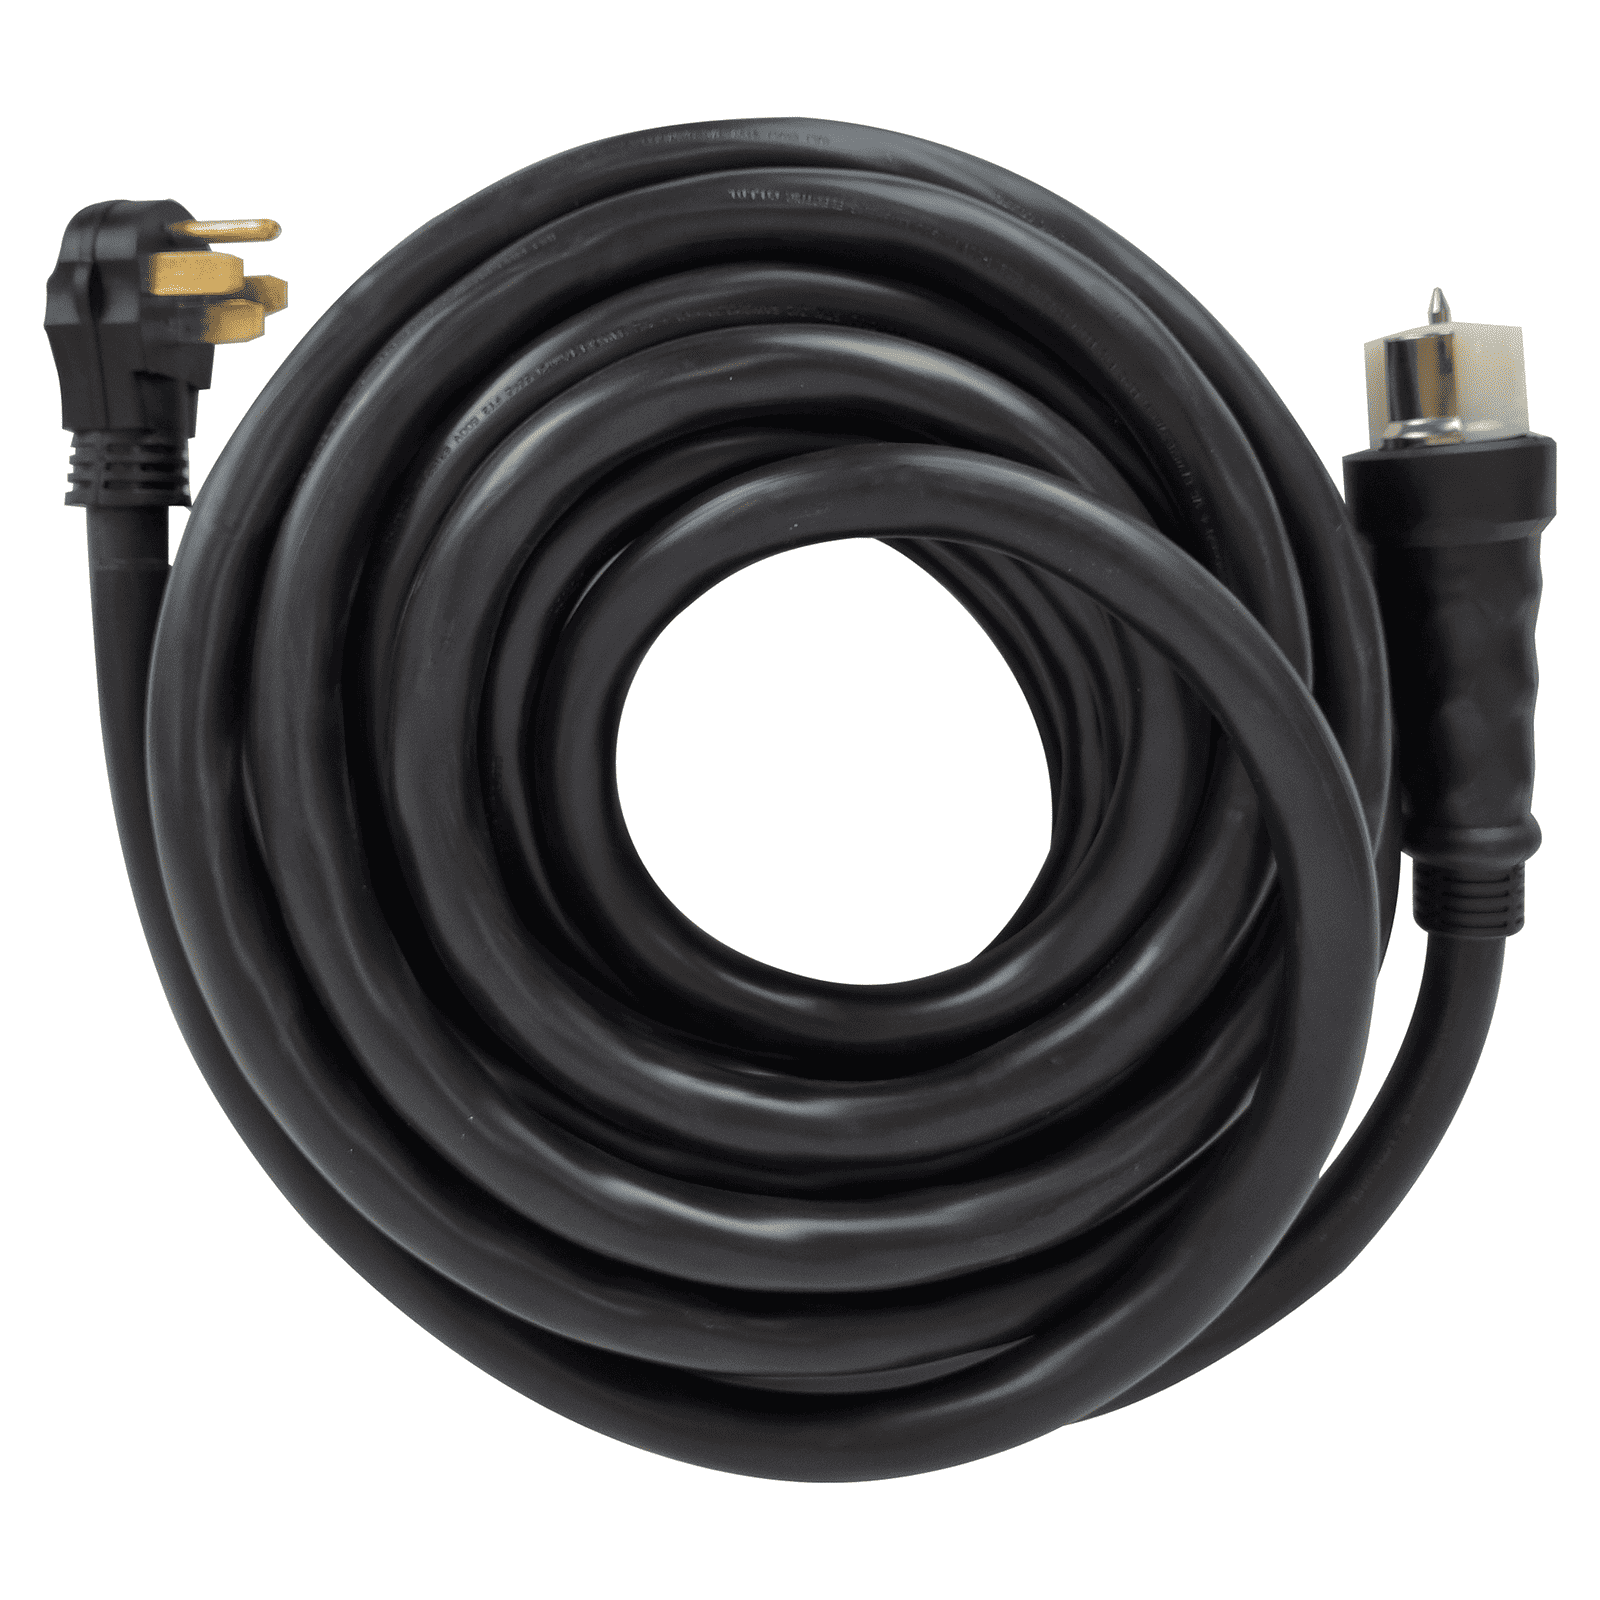 Coiled black DuroMax XP5050GC 50-Amp 6G 50' 14-50 CS6364 Home Generator Power Cord with a three-prong plug on one end and a male HDMI connector on the other.